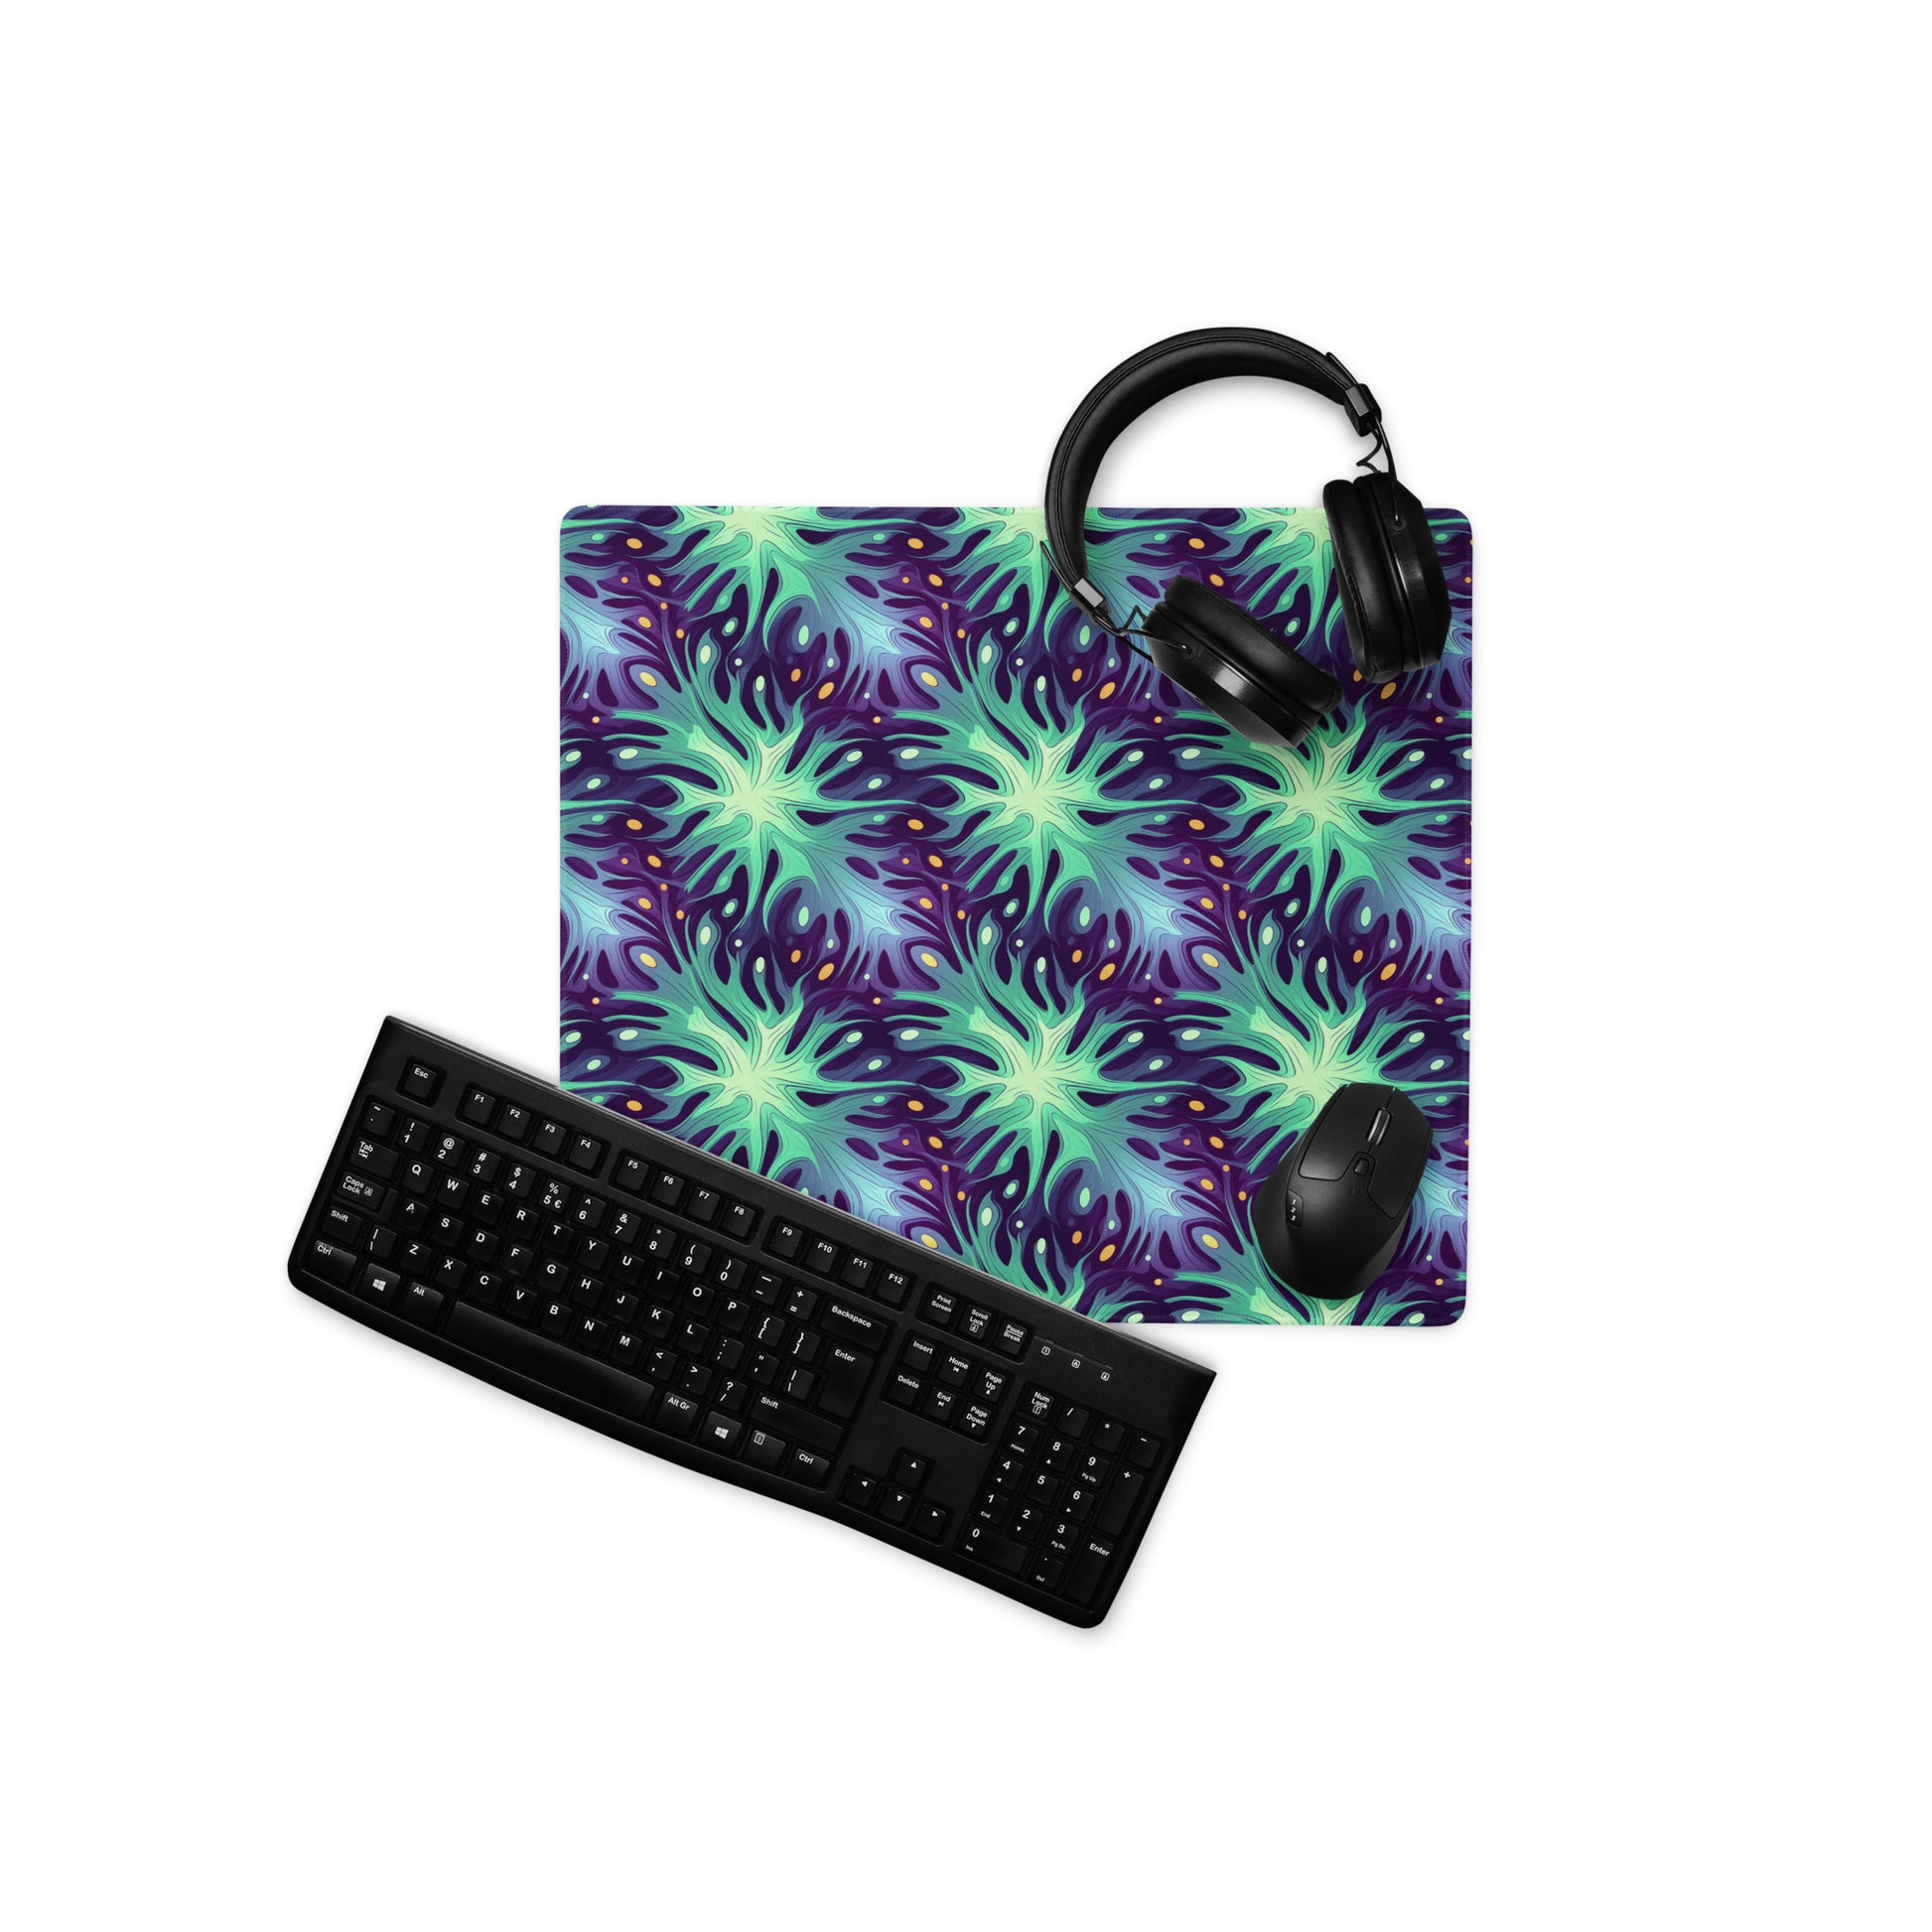 A 36" x 18" desk pad with a green and blue abstract pattern. With a keyboard, mouse, and headphones sitting on it.